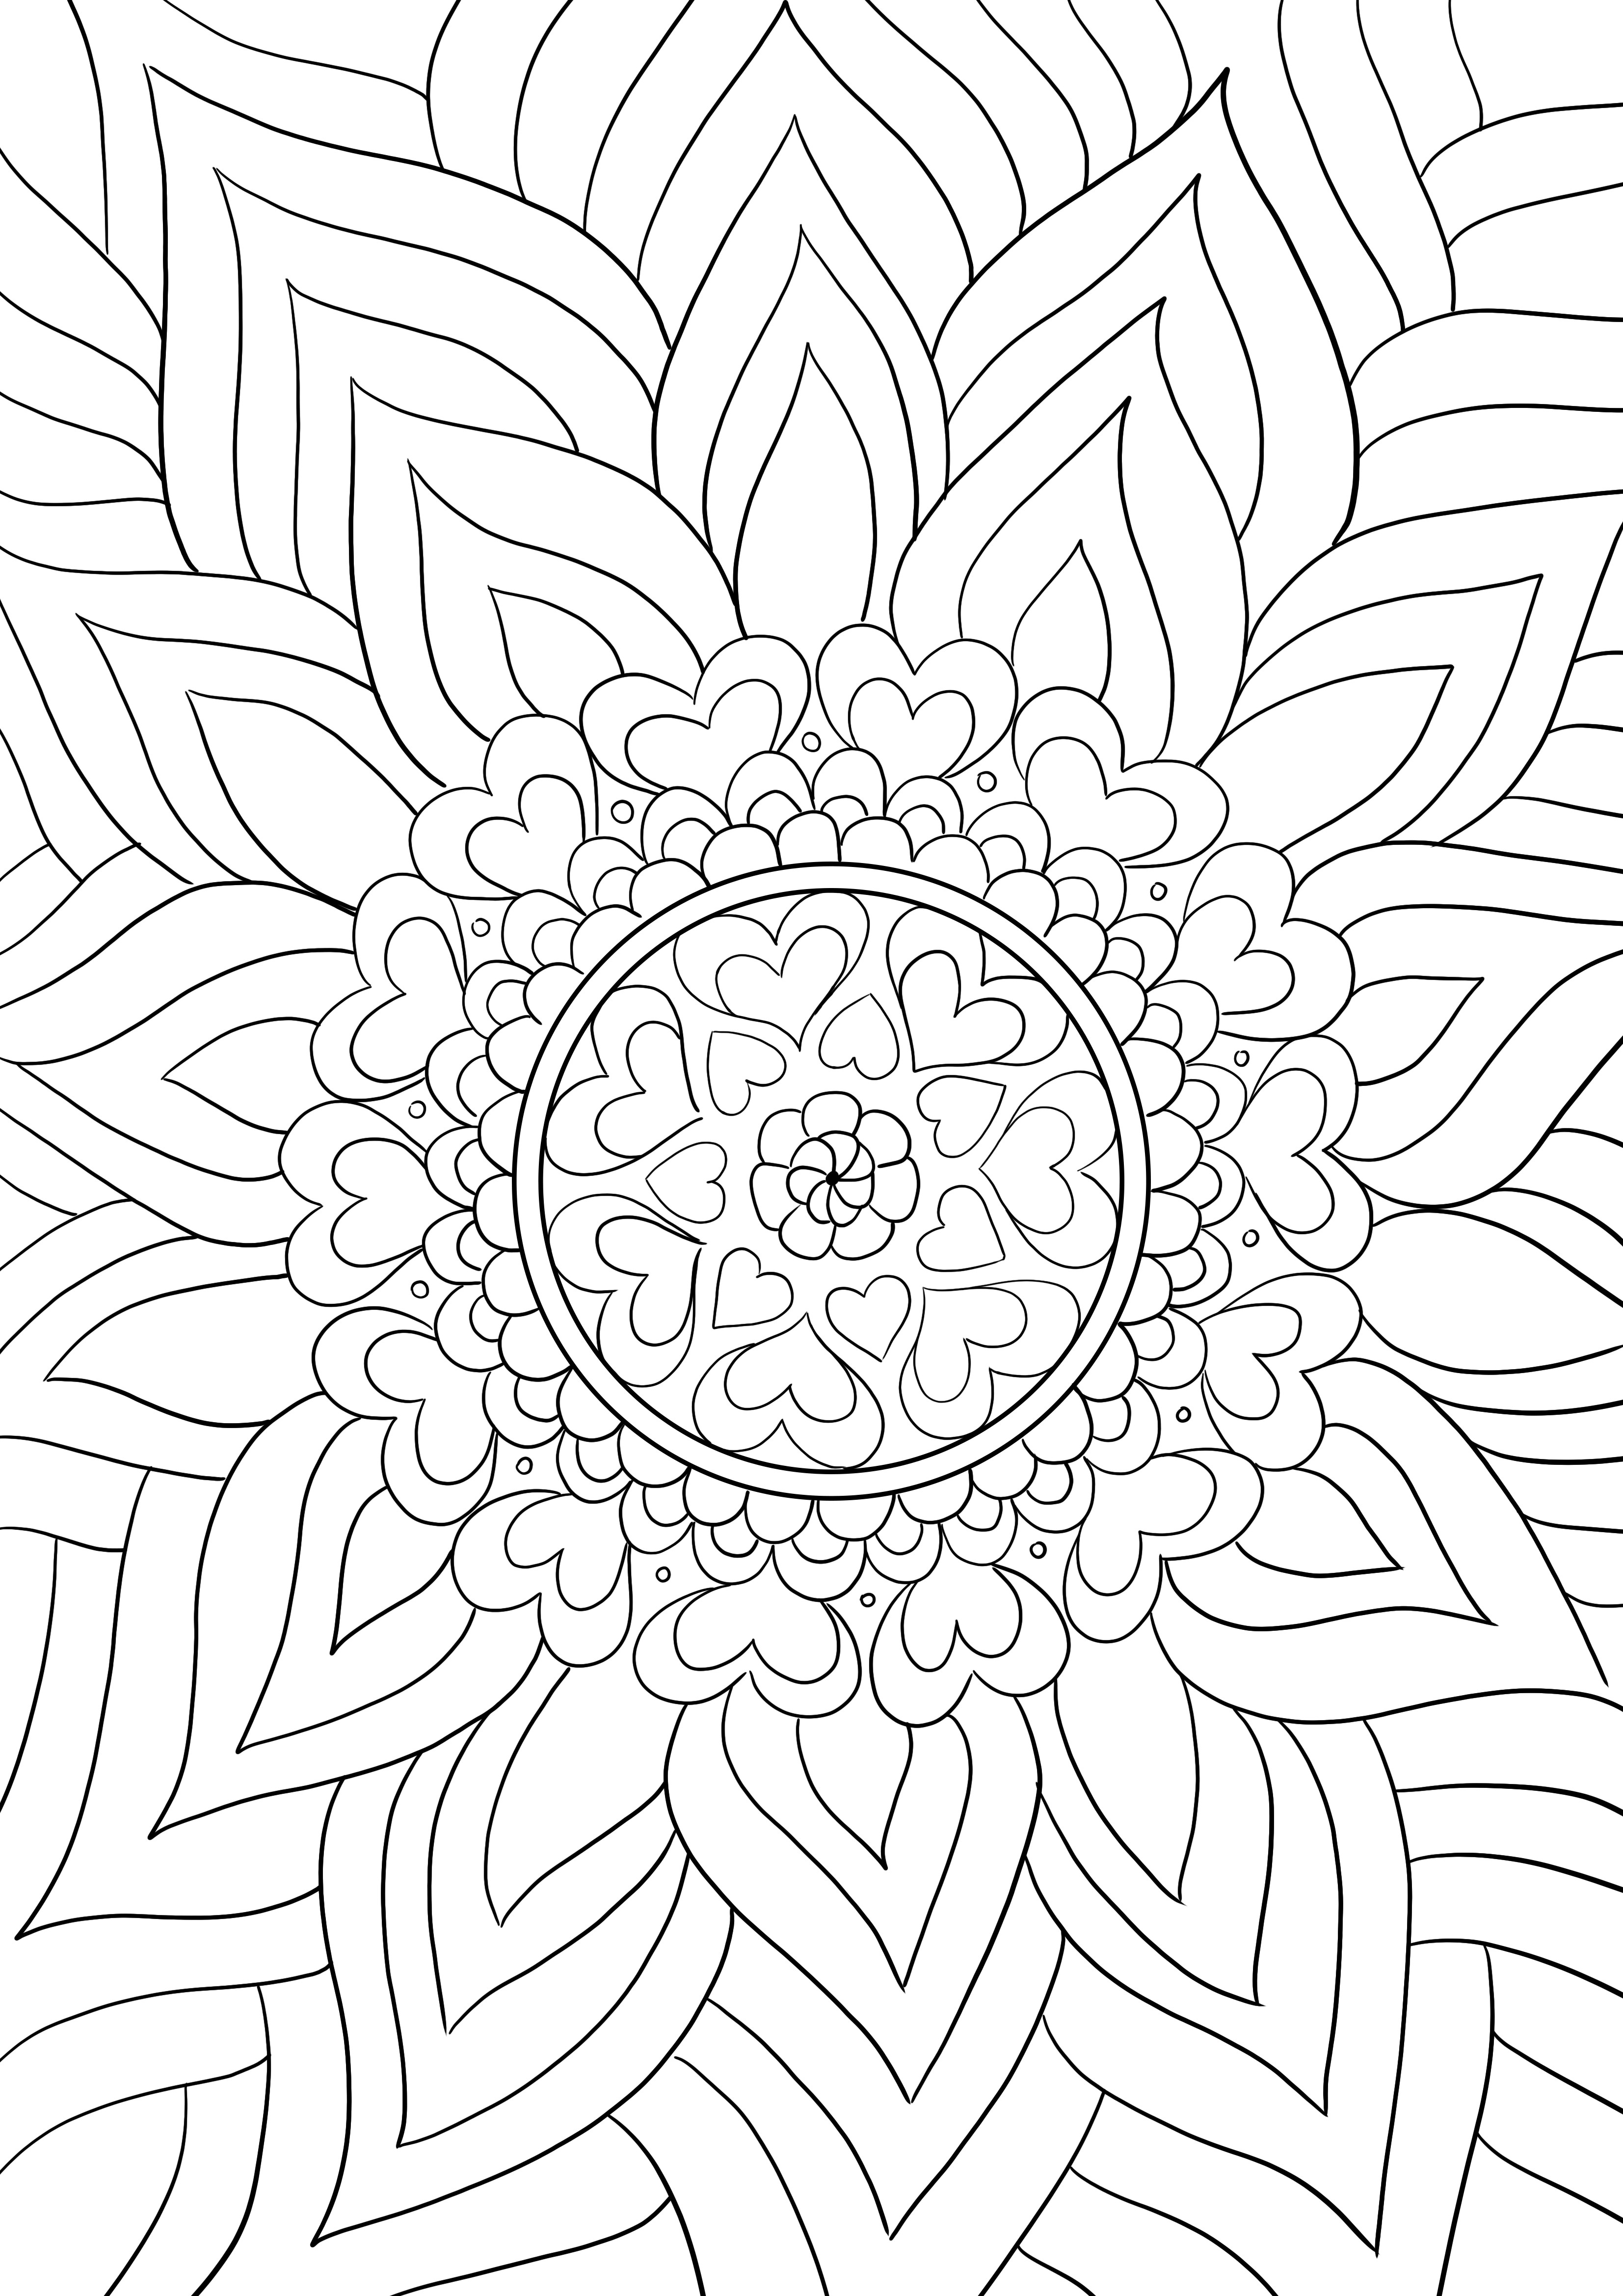 Floral Mandala Valentine’s day card coloring page for free printing